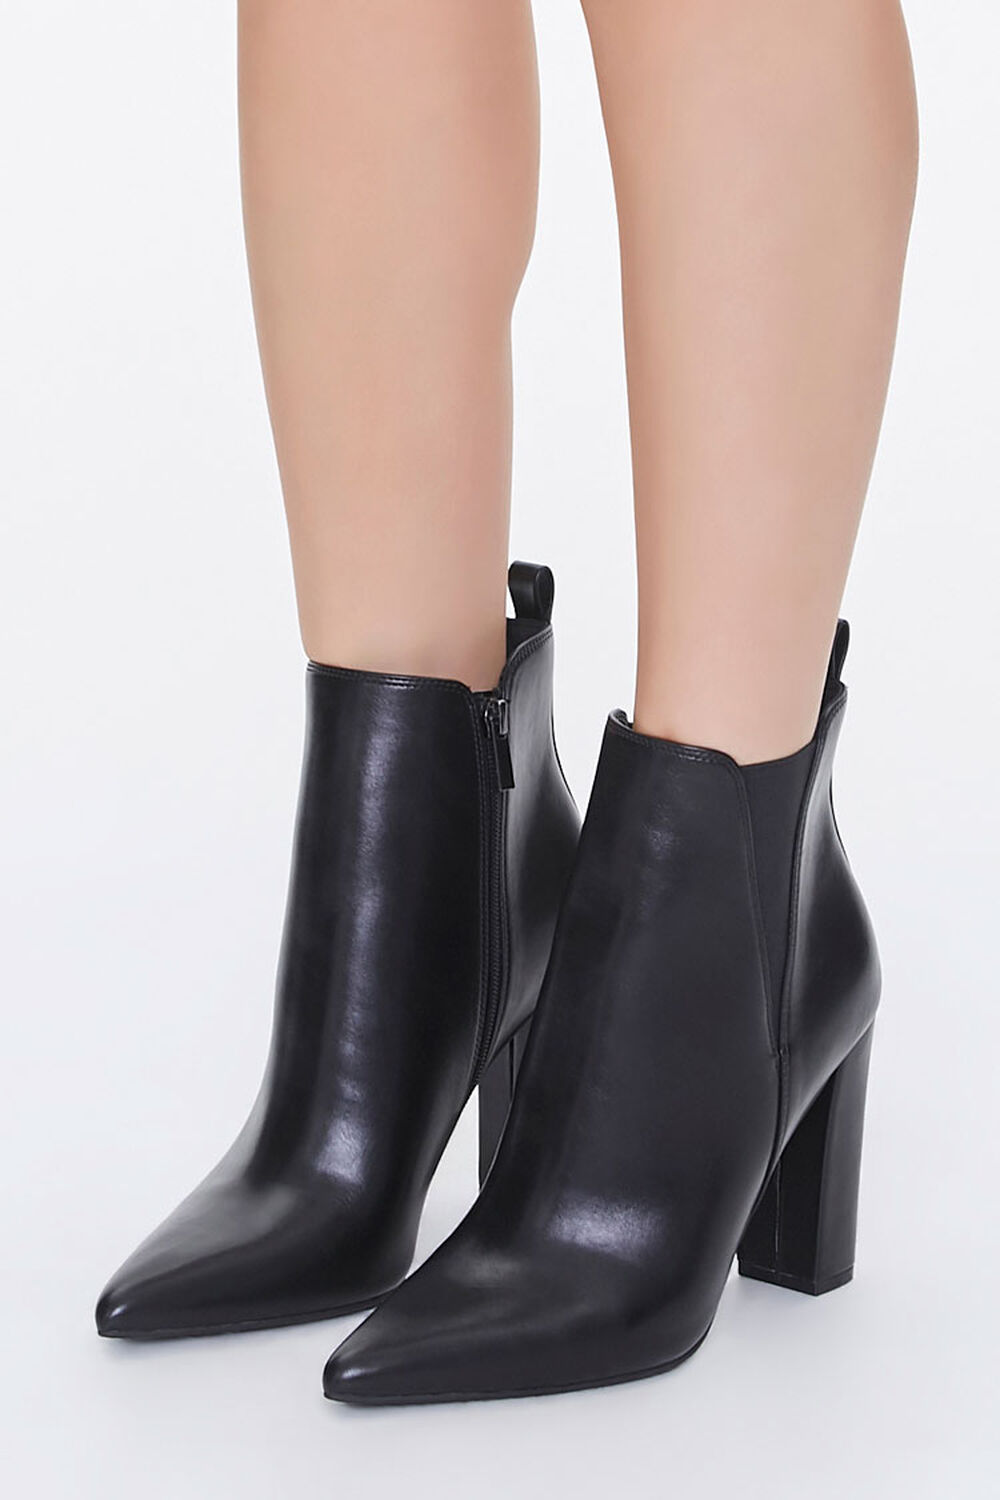 BLACK Pointed-Toe Chelsea Boots, image 1